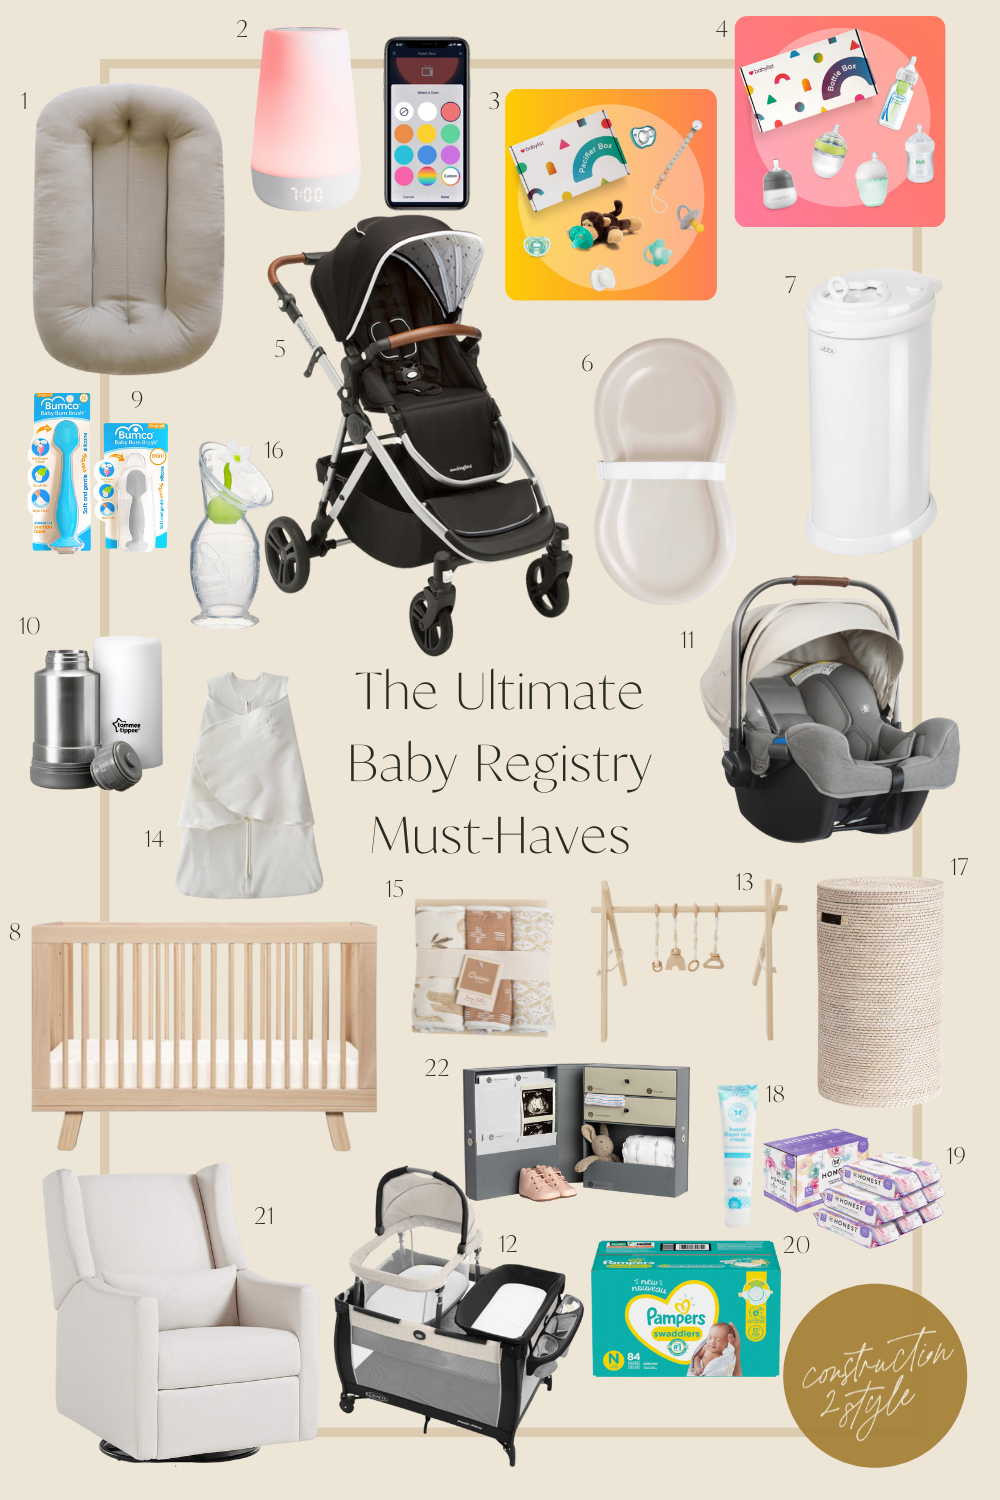 The Ultimate Guide to Creating Your Baby Registry | Top 22 Must-Haves